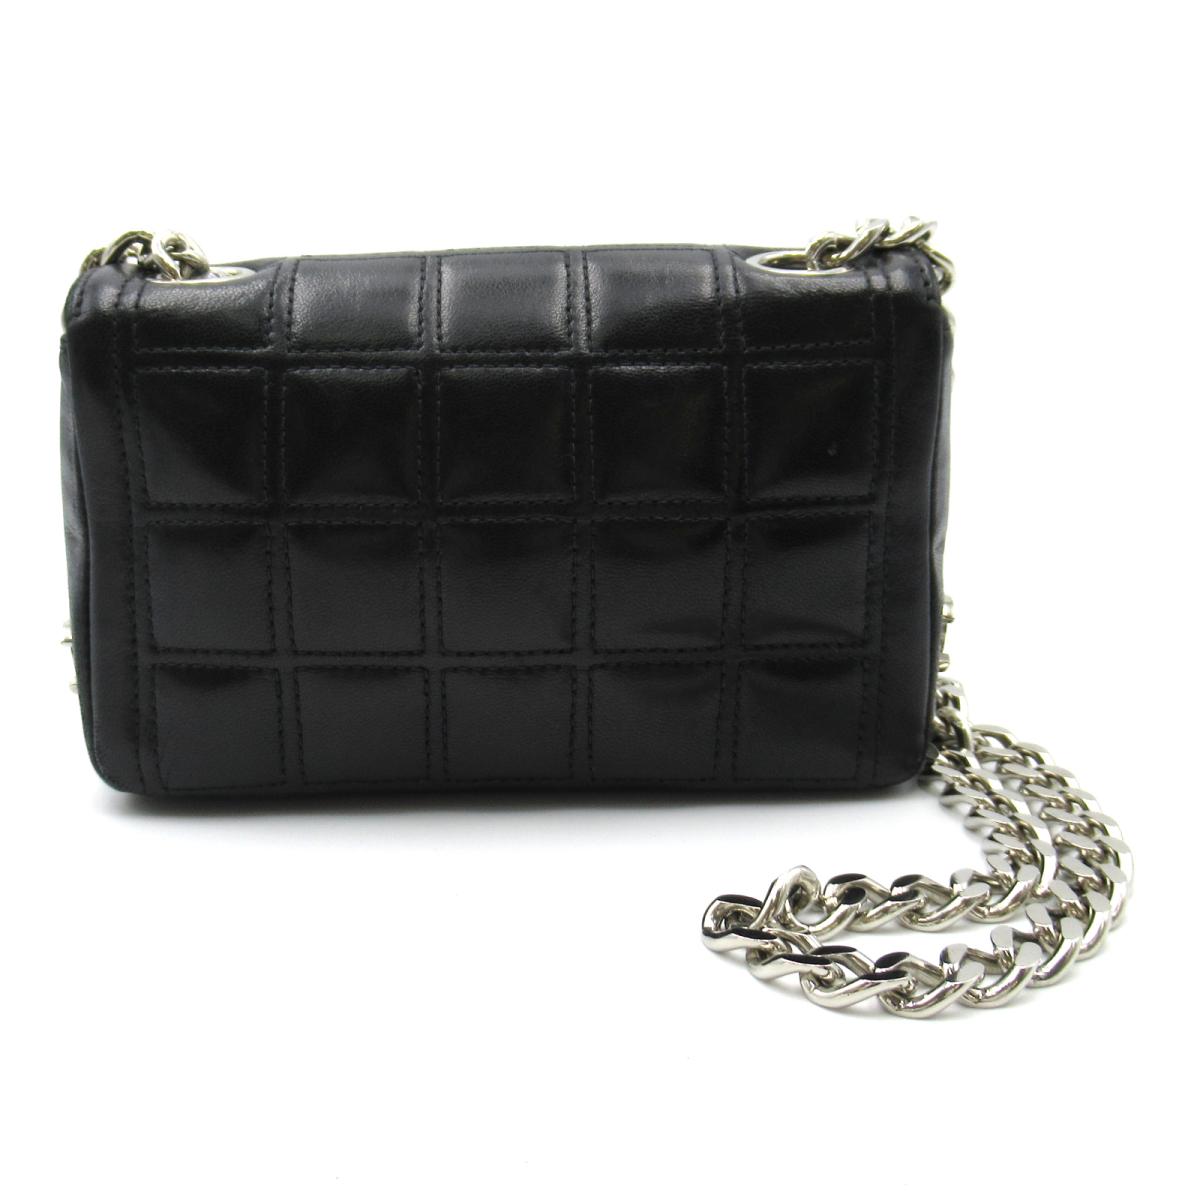 Reissue Leather Flap Bag